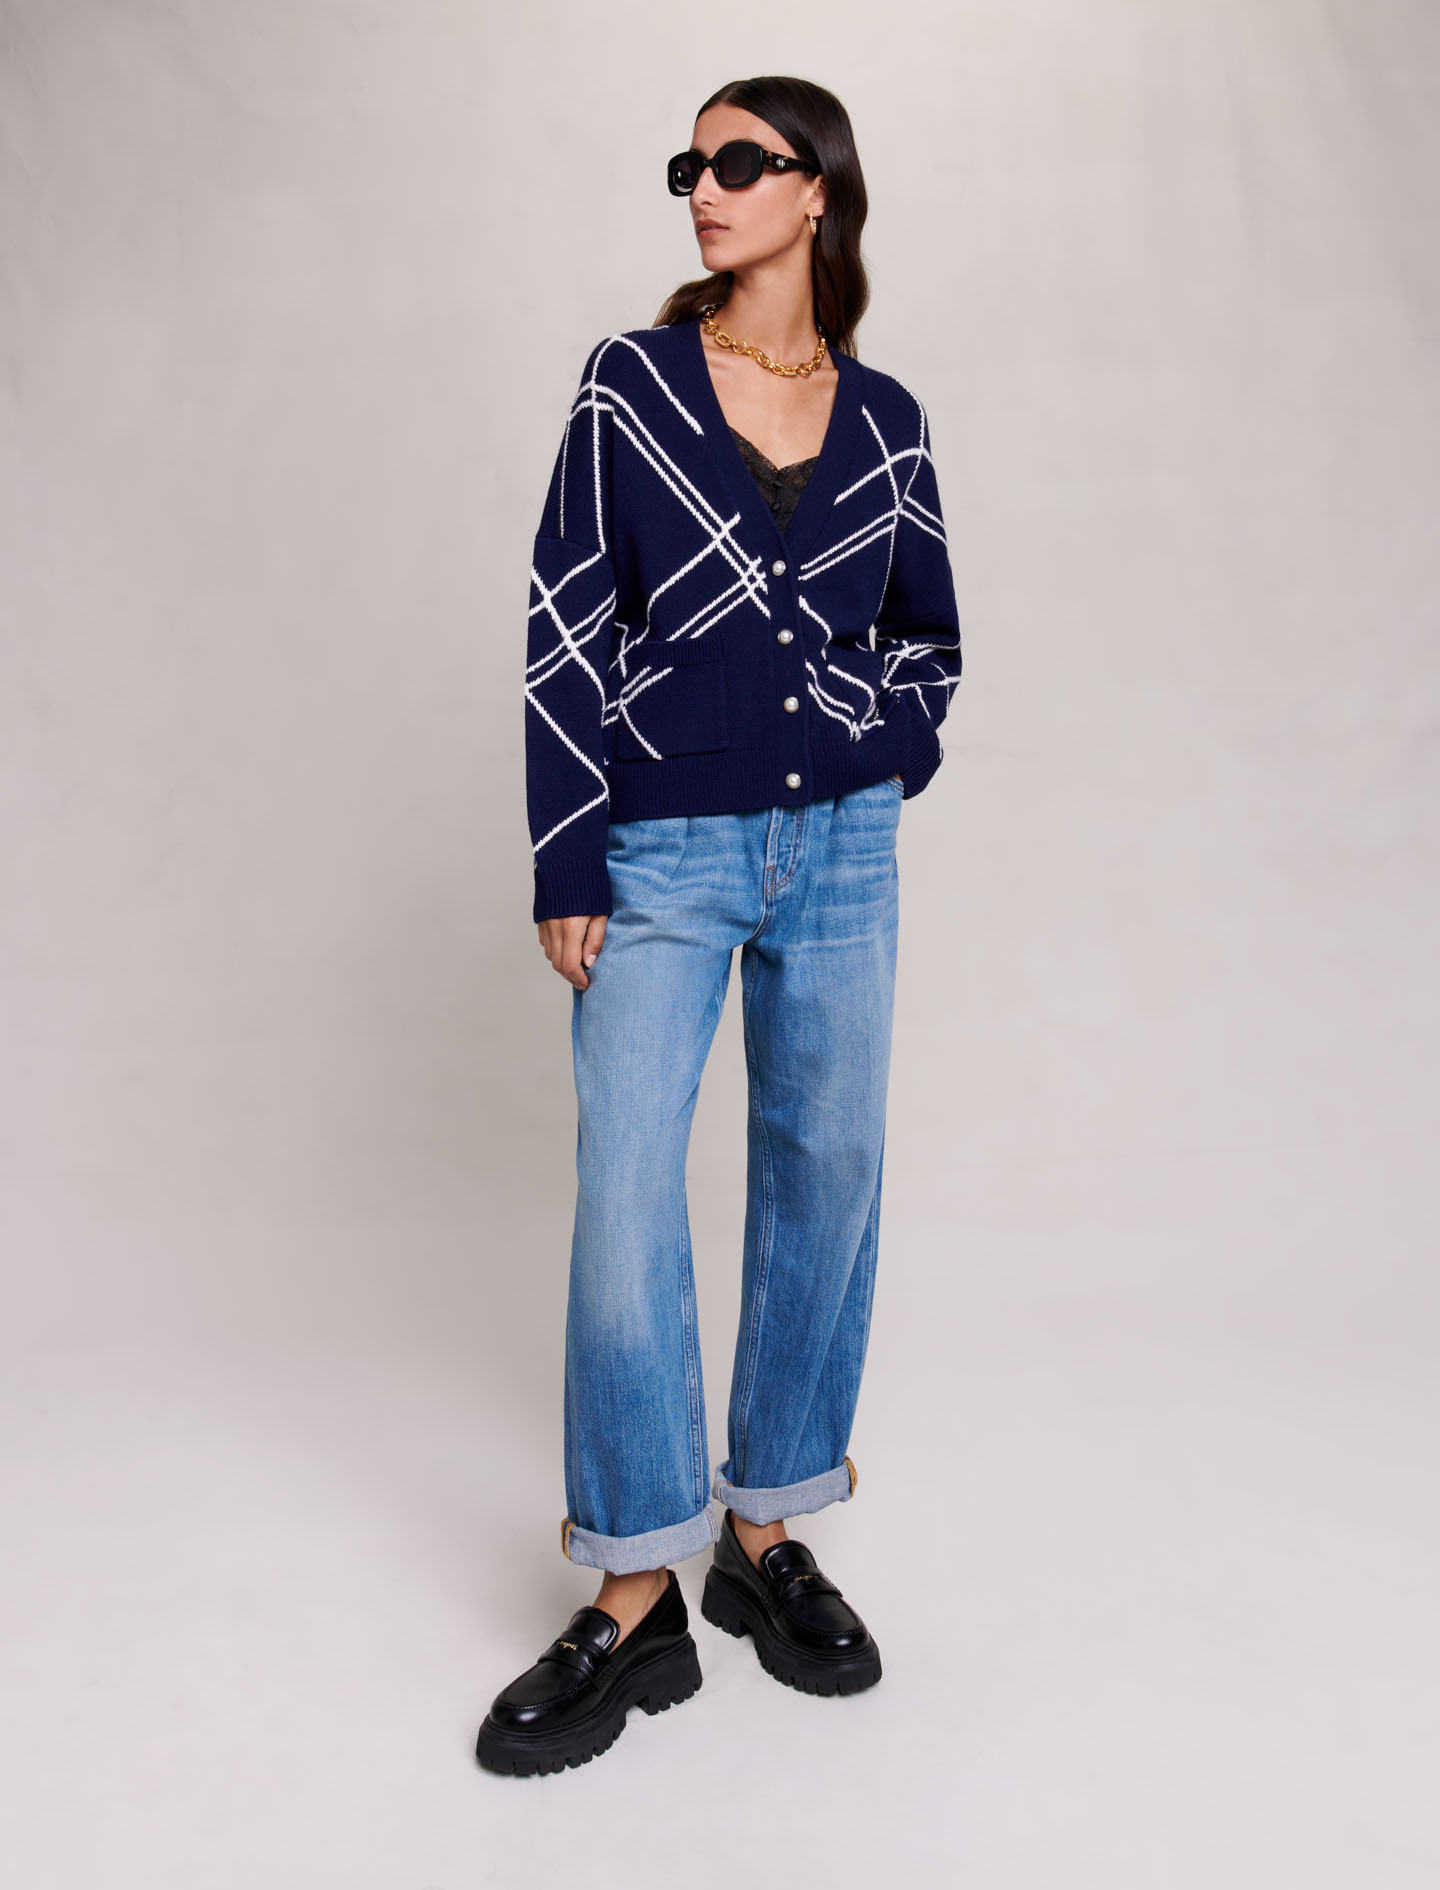 Maje Woman's wool, 123MOOVA for Fall/Winter, in color Navy / Blue